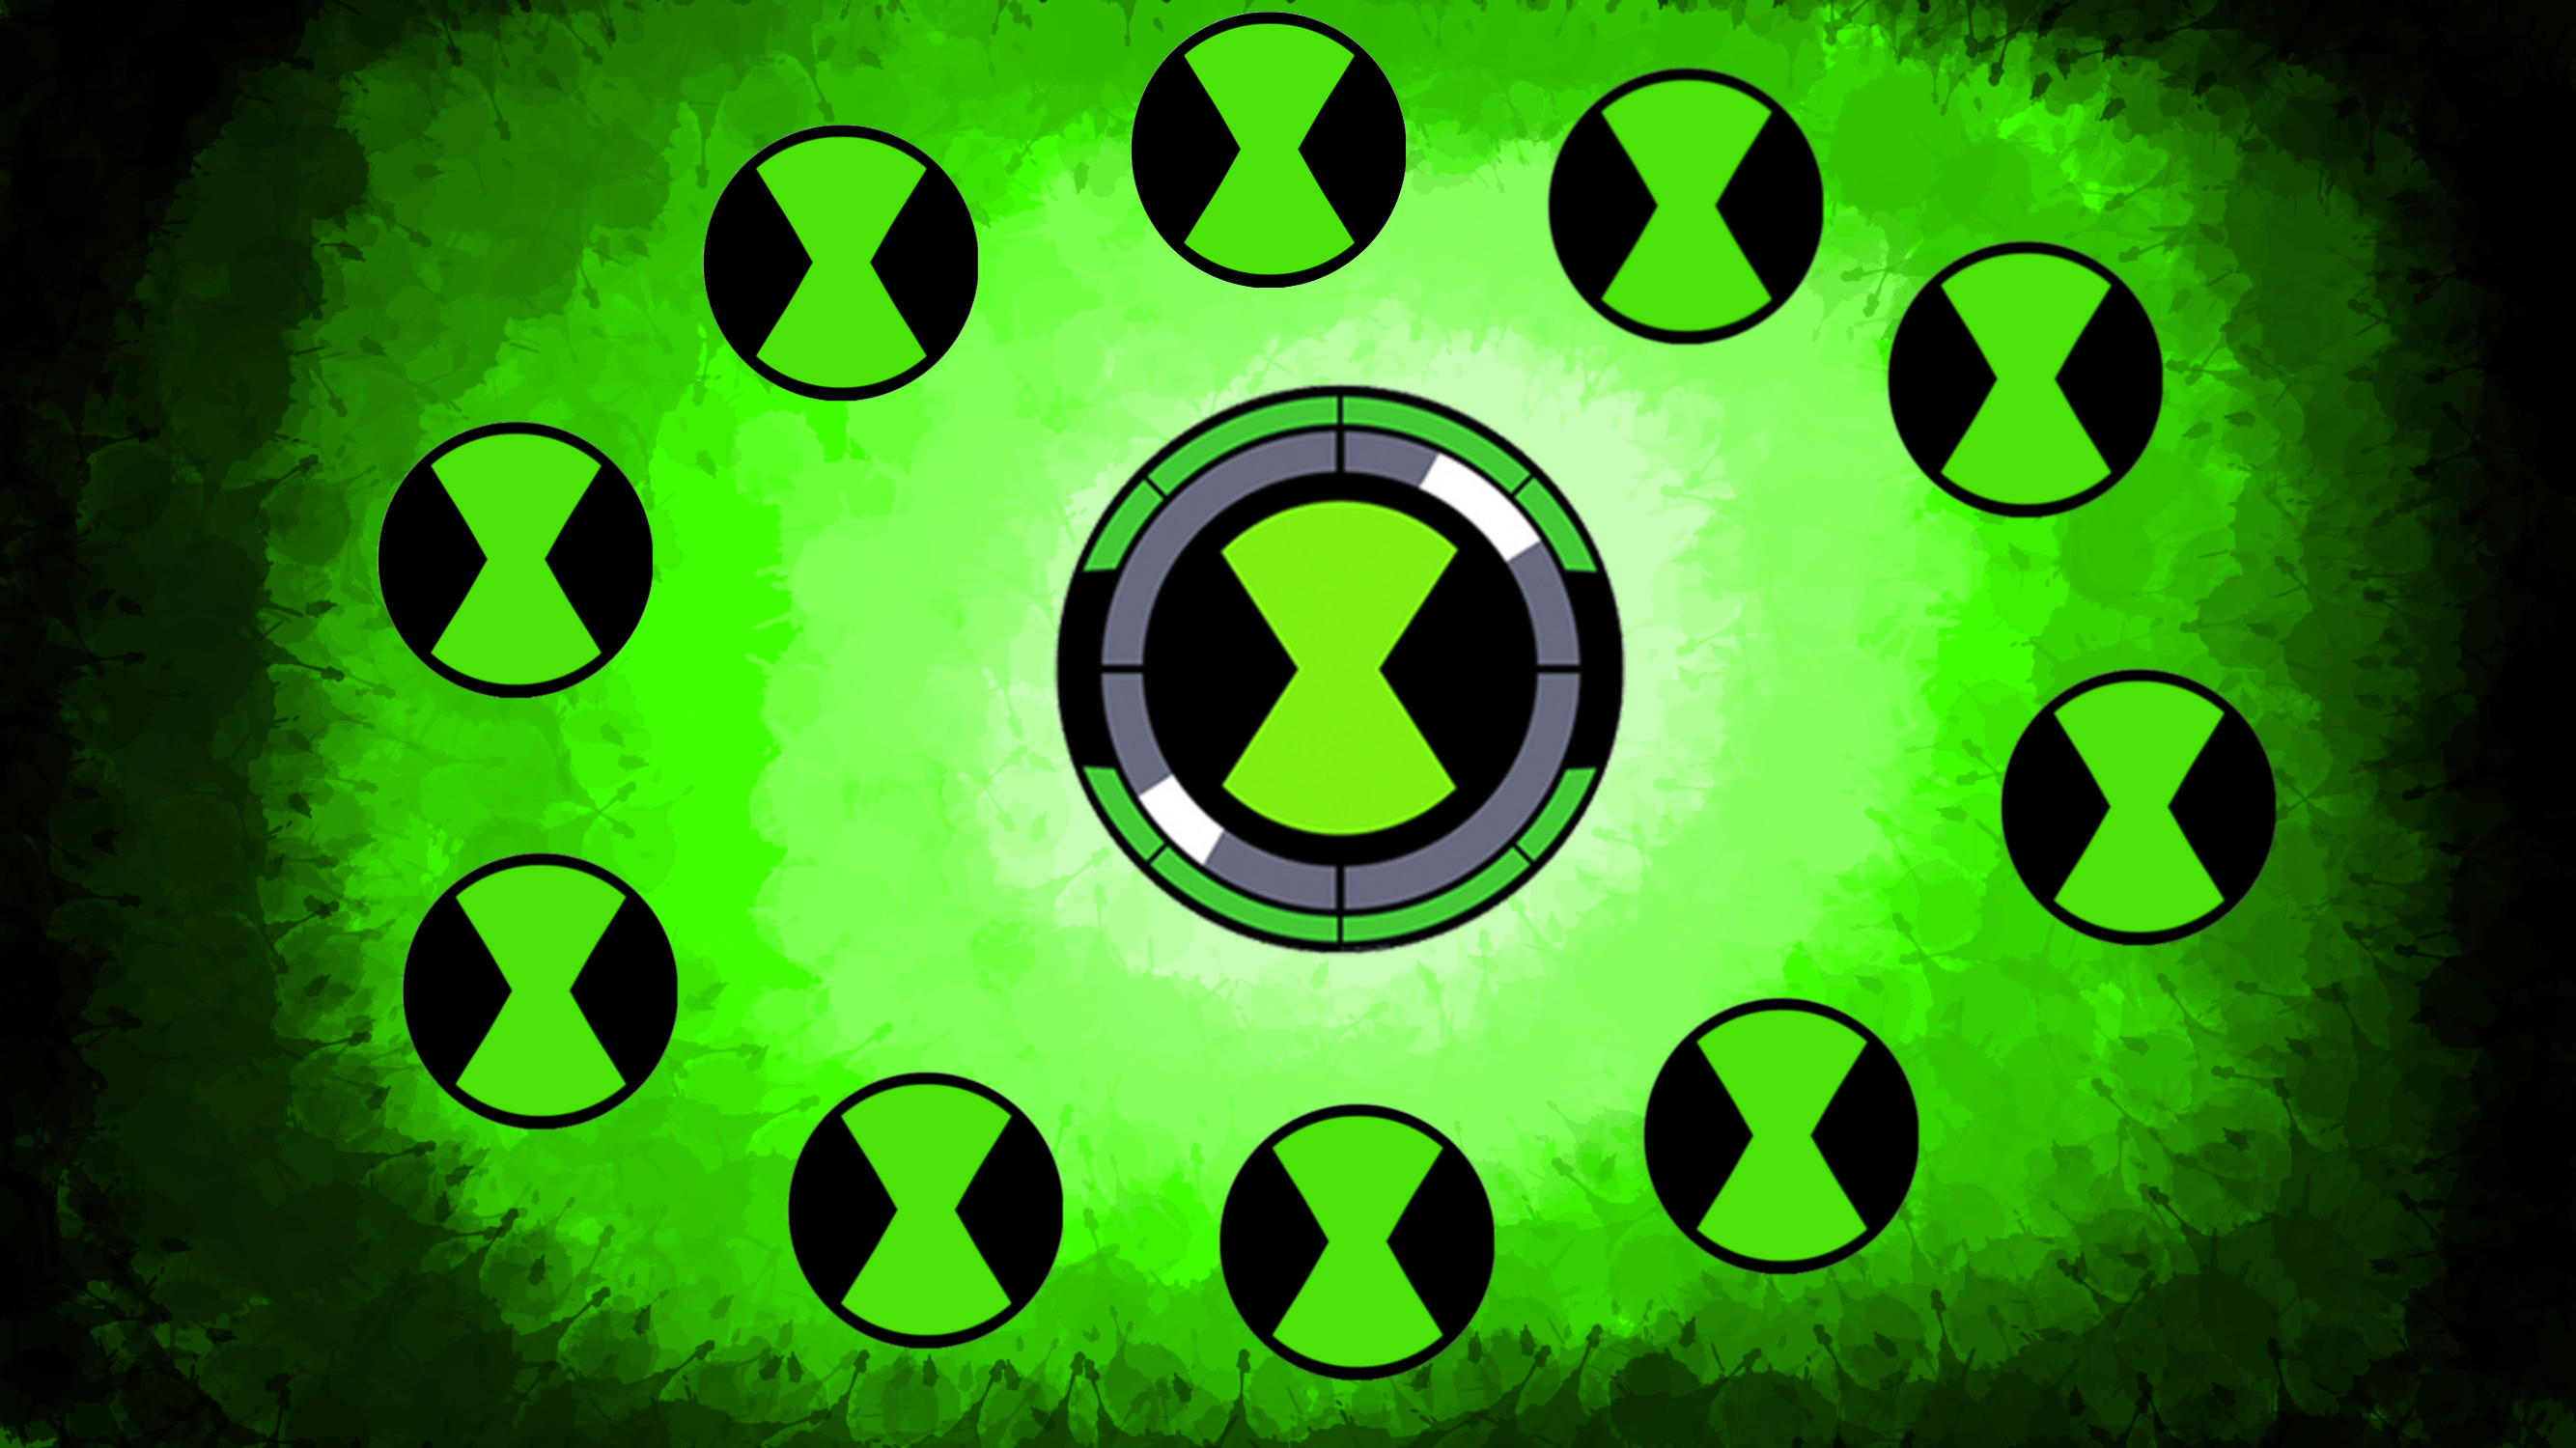 How To Make Ben 10 Classic Omnitrix with Functional Alien Interface +FREE  TEMPLATE